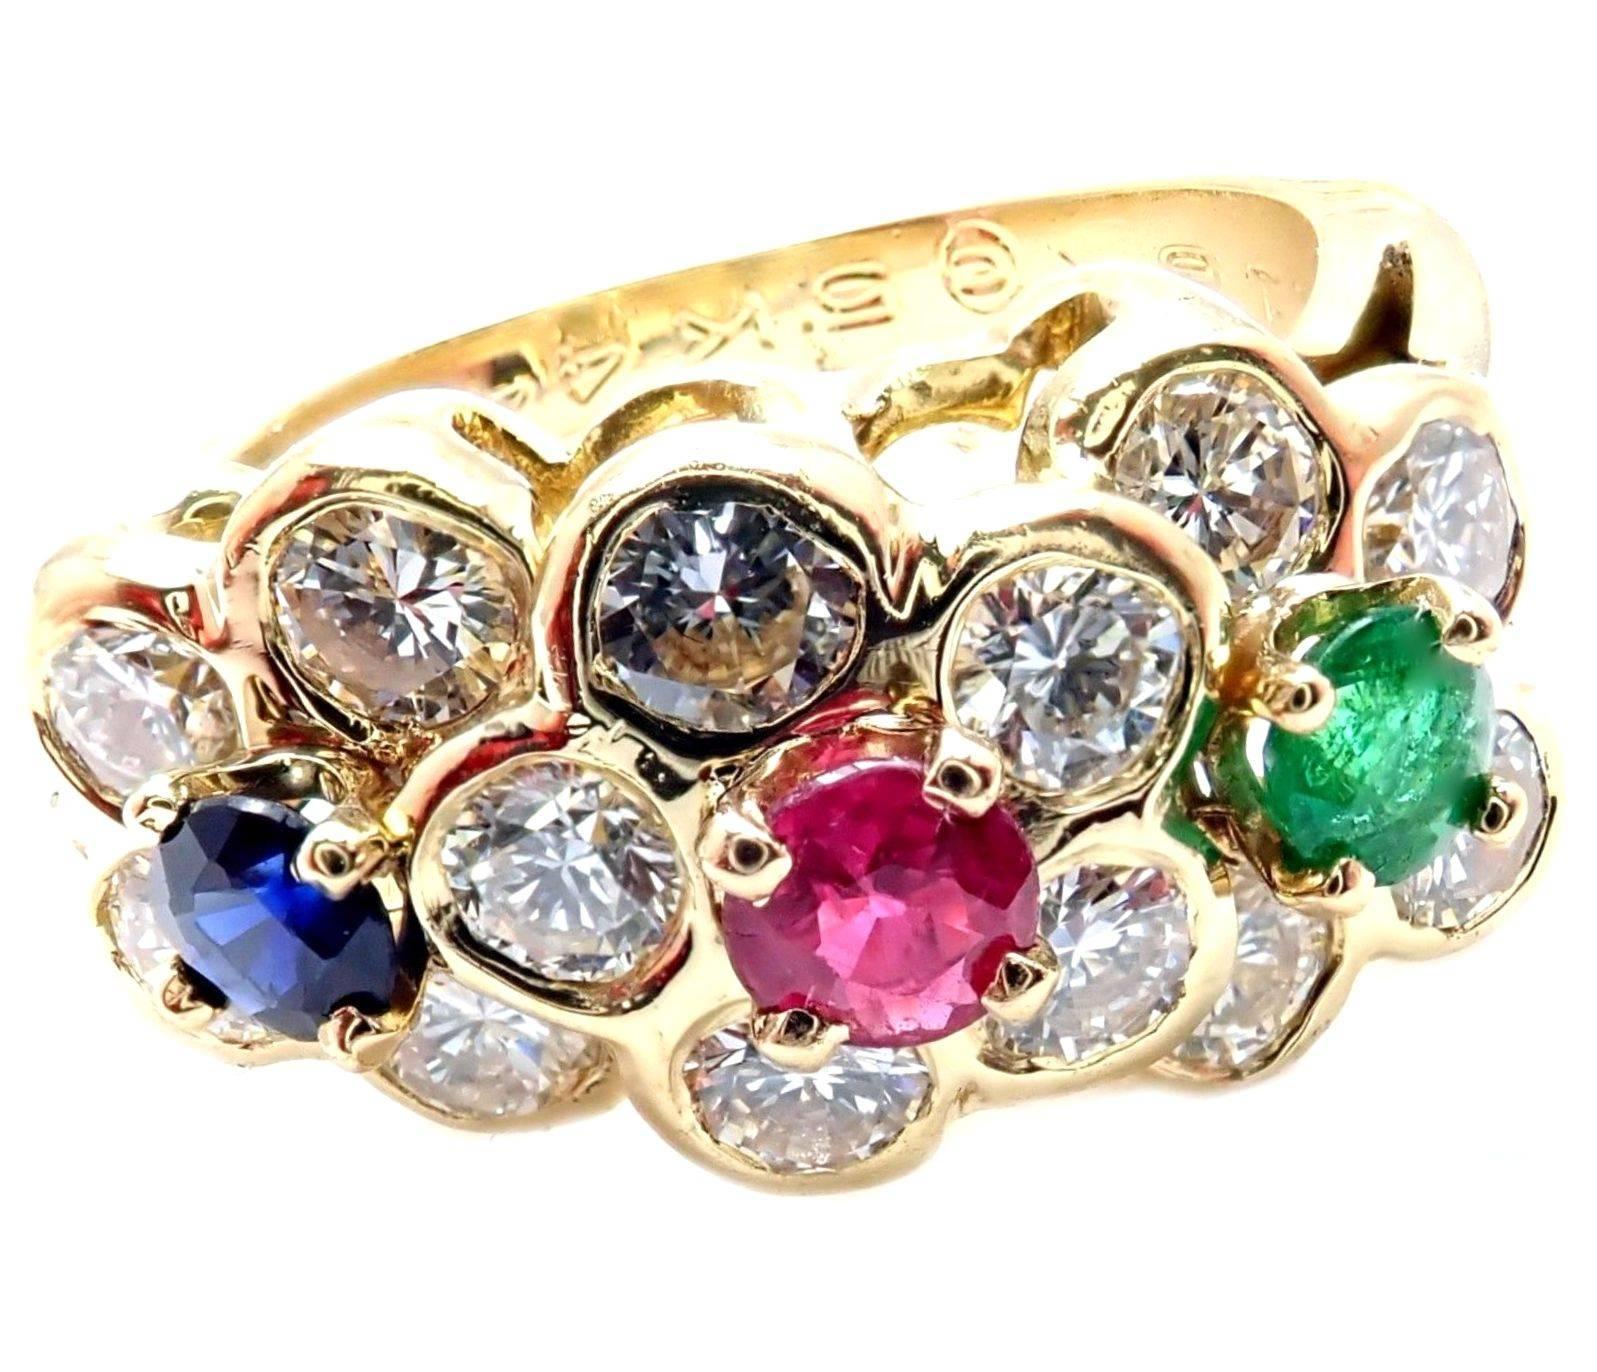 18k Yellow Gold Diamond Sapphire Ruby Emerald Flower Band Ring by Van Cleef & Arpels. 
With 13 diamonds, VS1 Clarity, G Color. Total Diamond Weight approx. 1.00ctw. 
One Ruby, Emerald, and Sapphire: 0.13ct each
Details:
Weight: 4.2 grams
Size: 4.5,